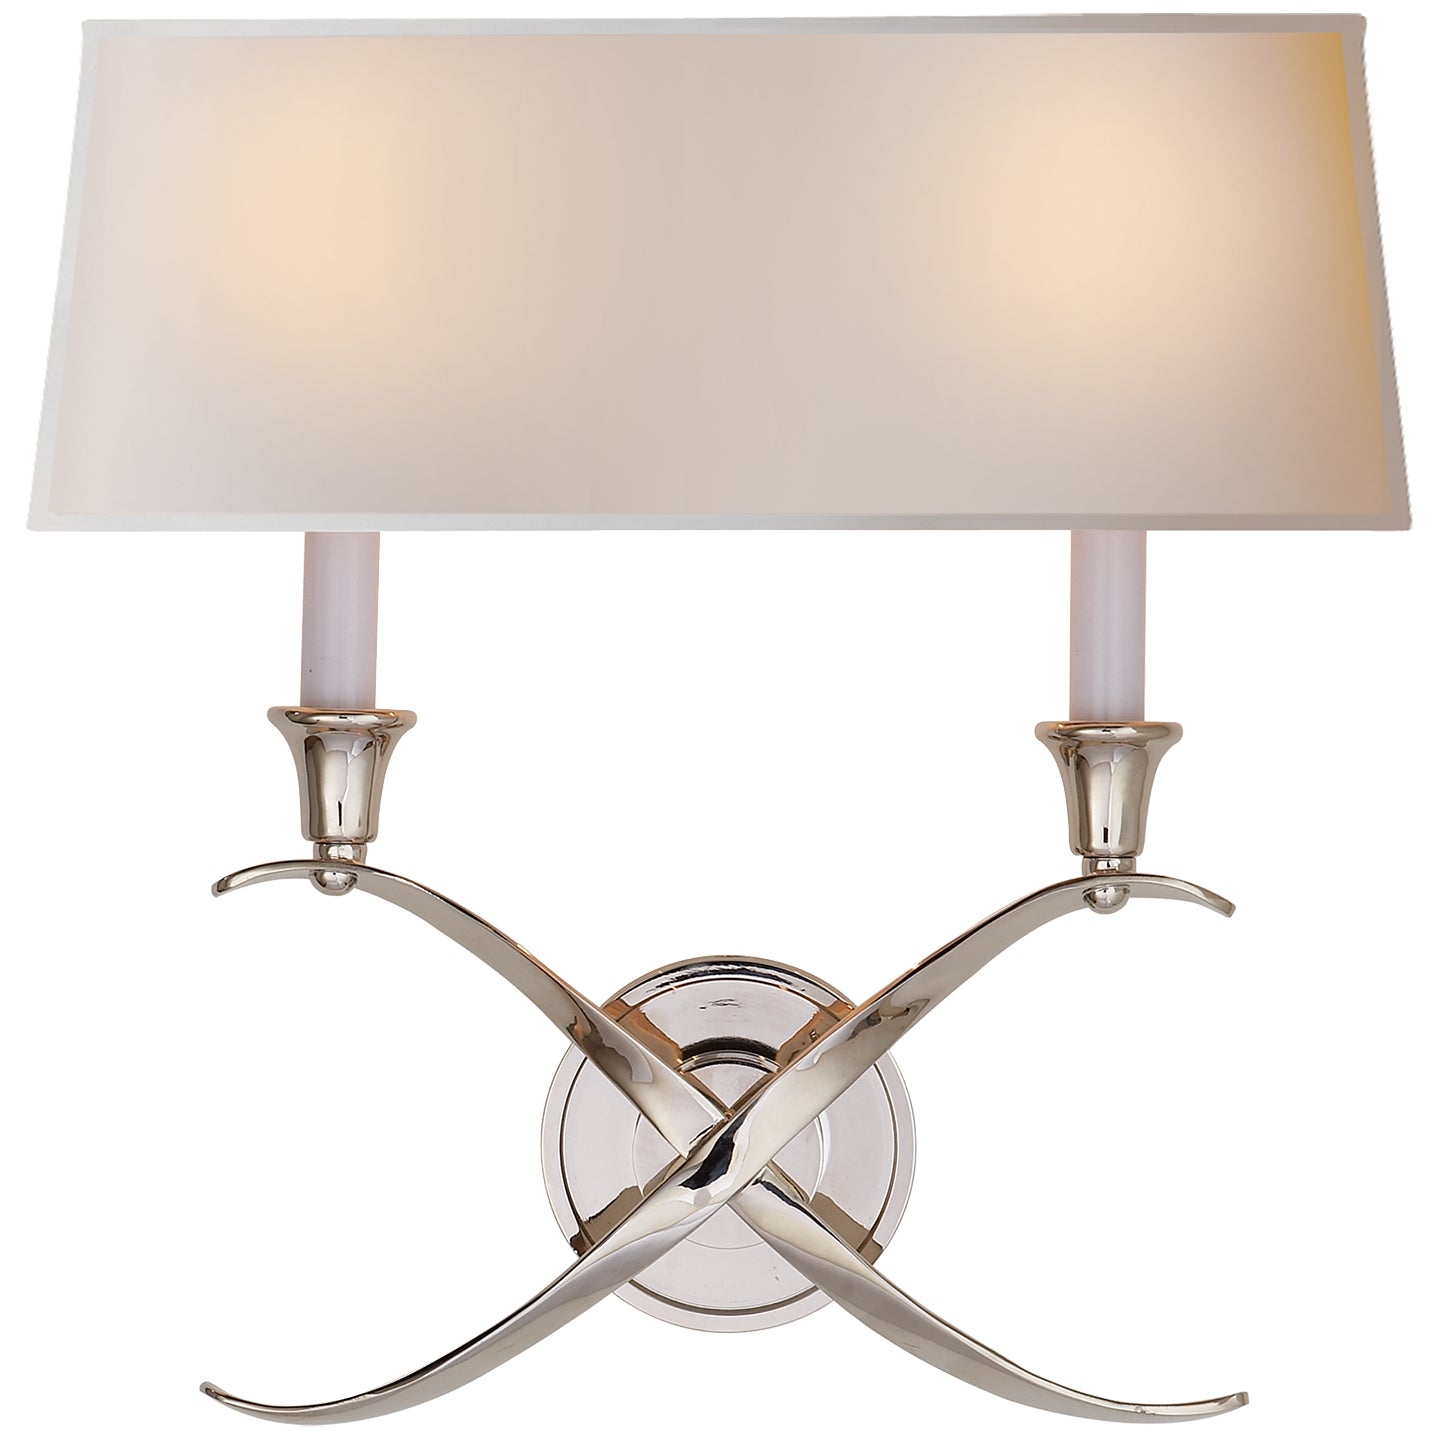 Load image into Gallery viewer, Visual Comfort Signature - CHD 1191PN-NP - Two Light Wall Sconce - Cross Bouillotte - Polished Nickel
